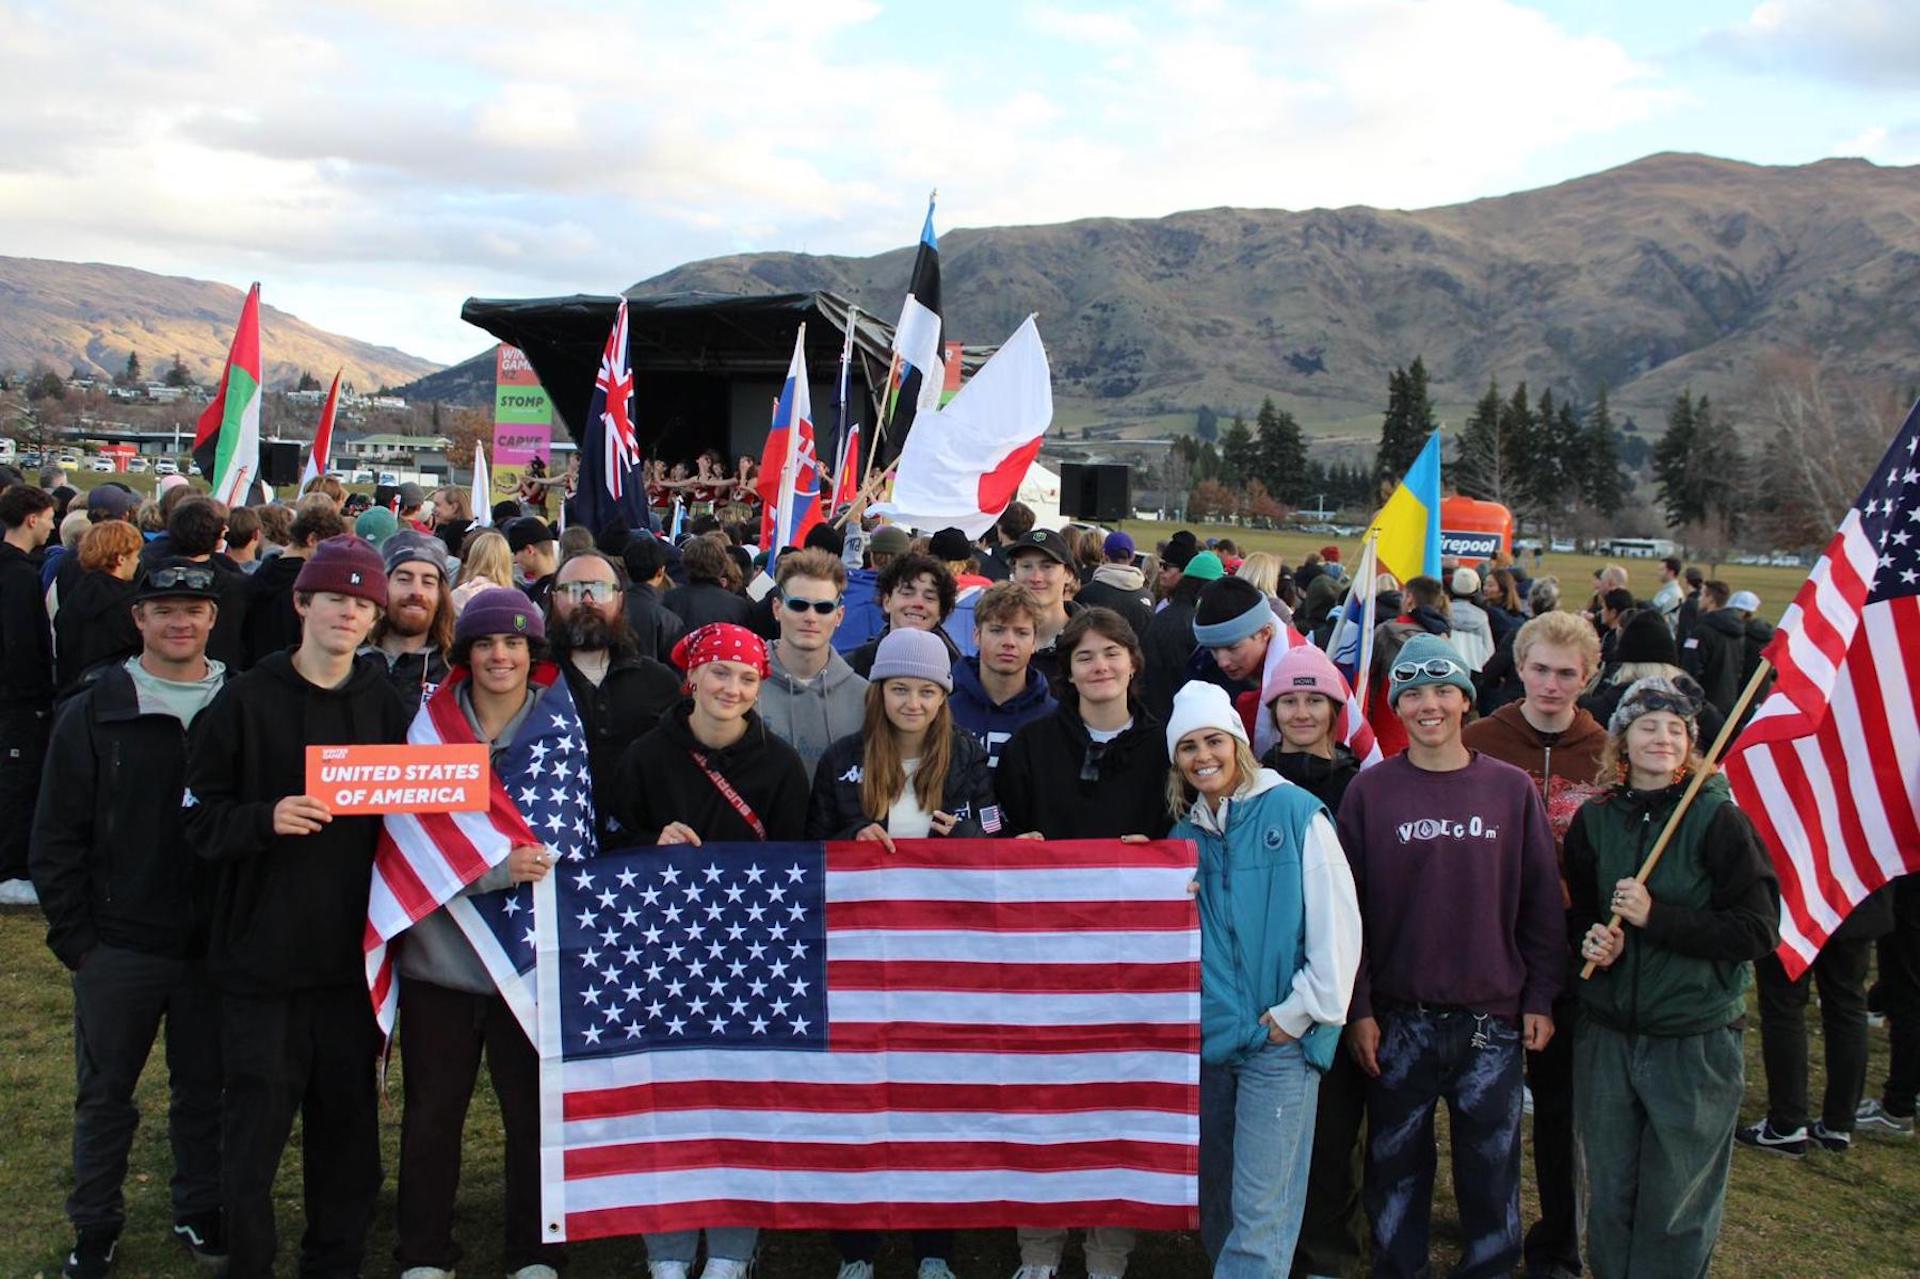 U.S. athletes at the 2023 Park & Pipe Junior World Championship in Cardrona, NZ. 